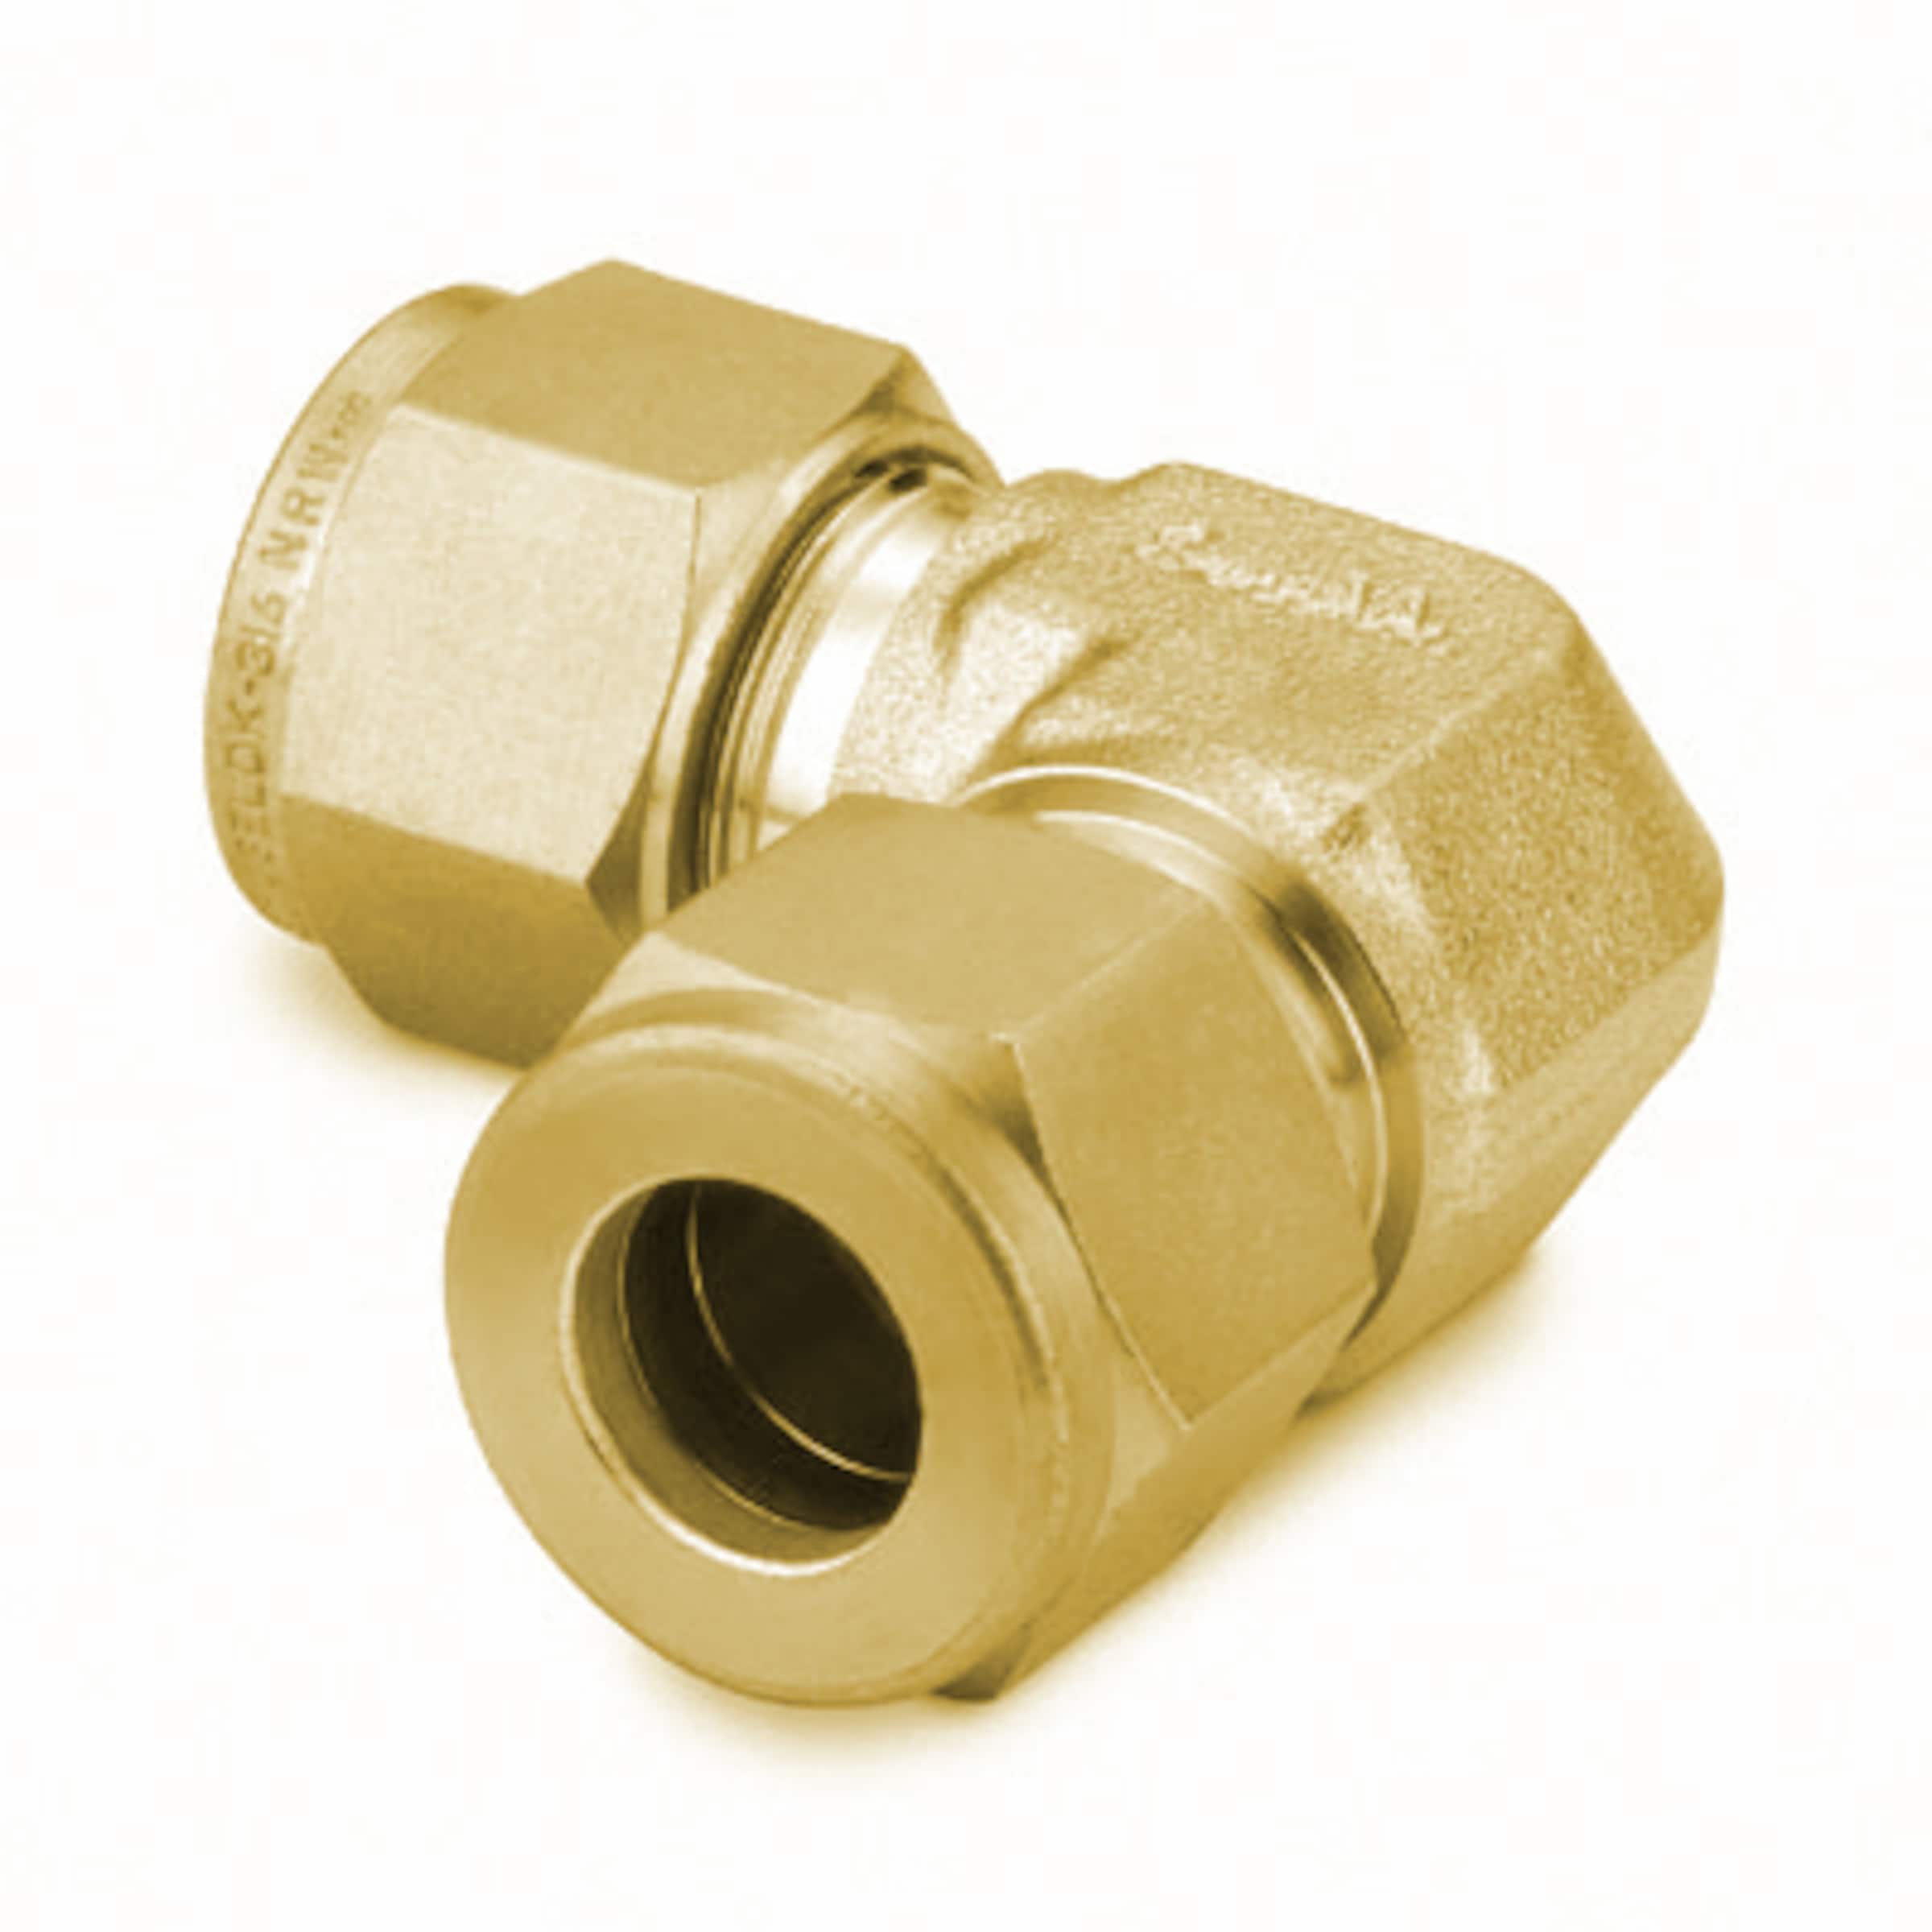 3/16 Compression Tube Union 90° Brass Fittings, B-65